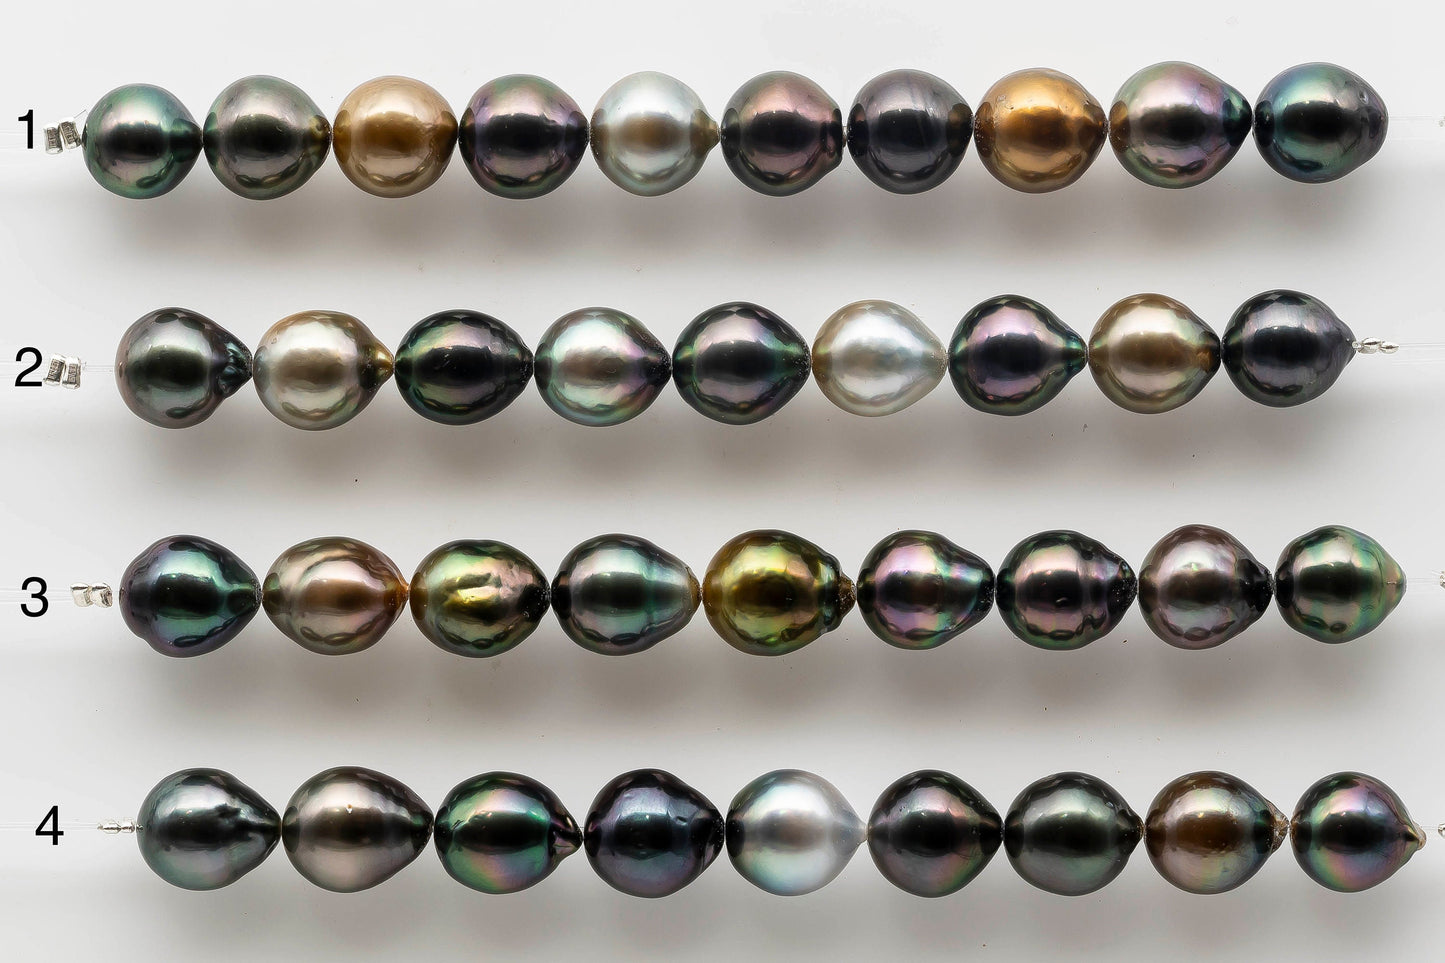 9-10mm Multi Color Teardrop Tahitian Pearl with Amazing High Luster in Short Strand for Making Jewelry, SKU # 1541TH